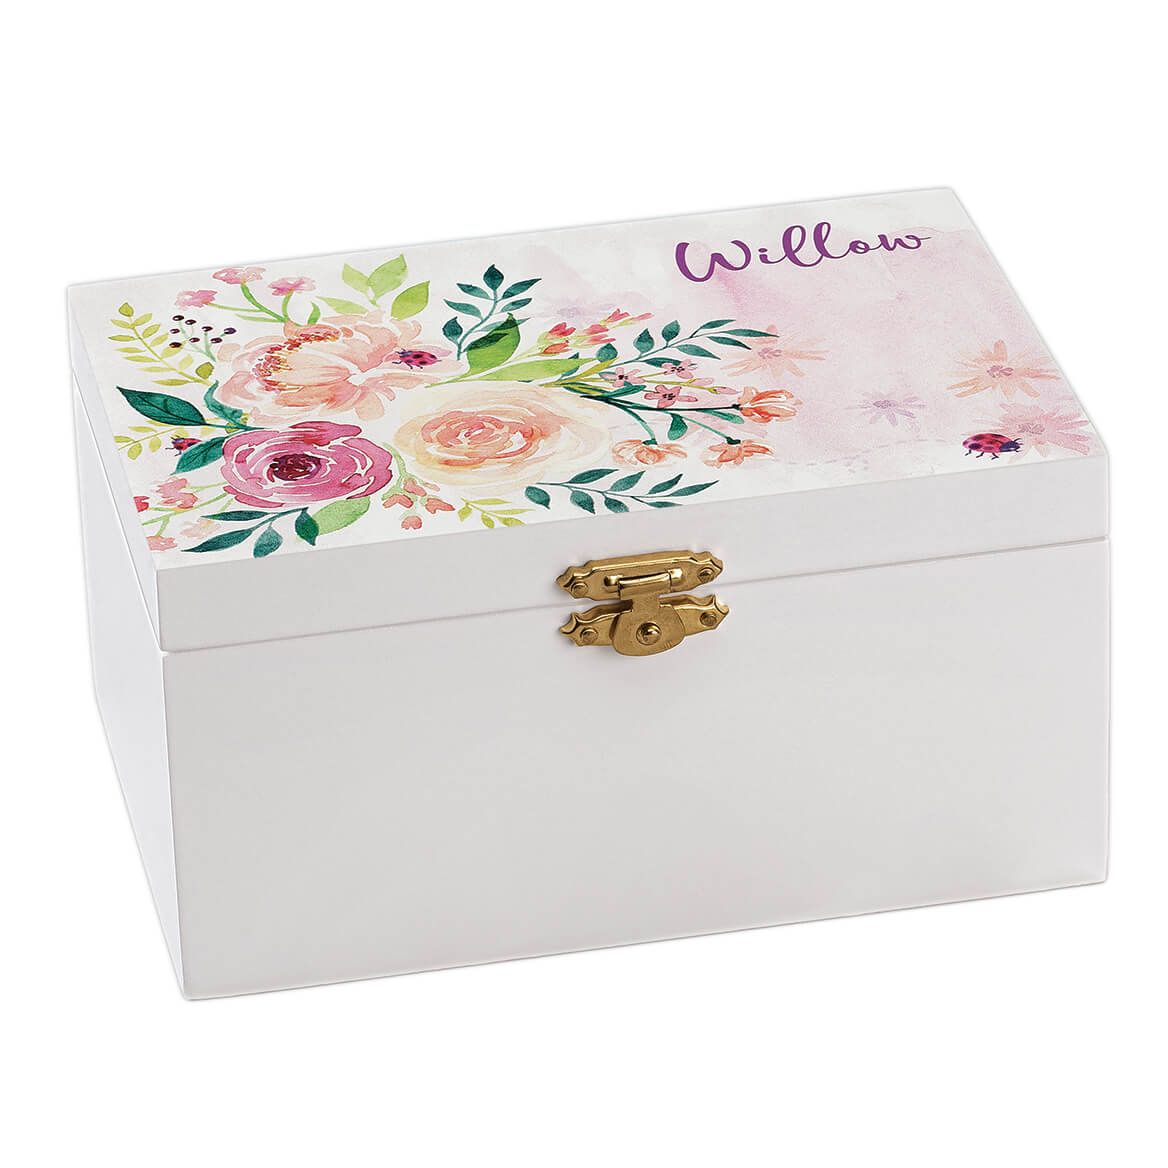 Personalized Watercolor Floral Musical Jewelry Box + '-' + 373757